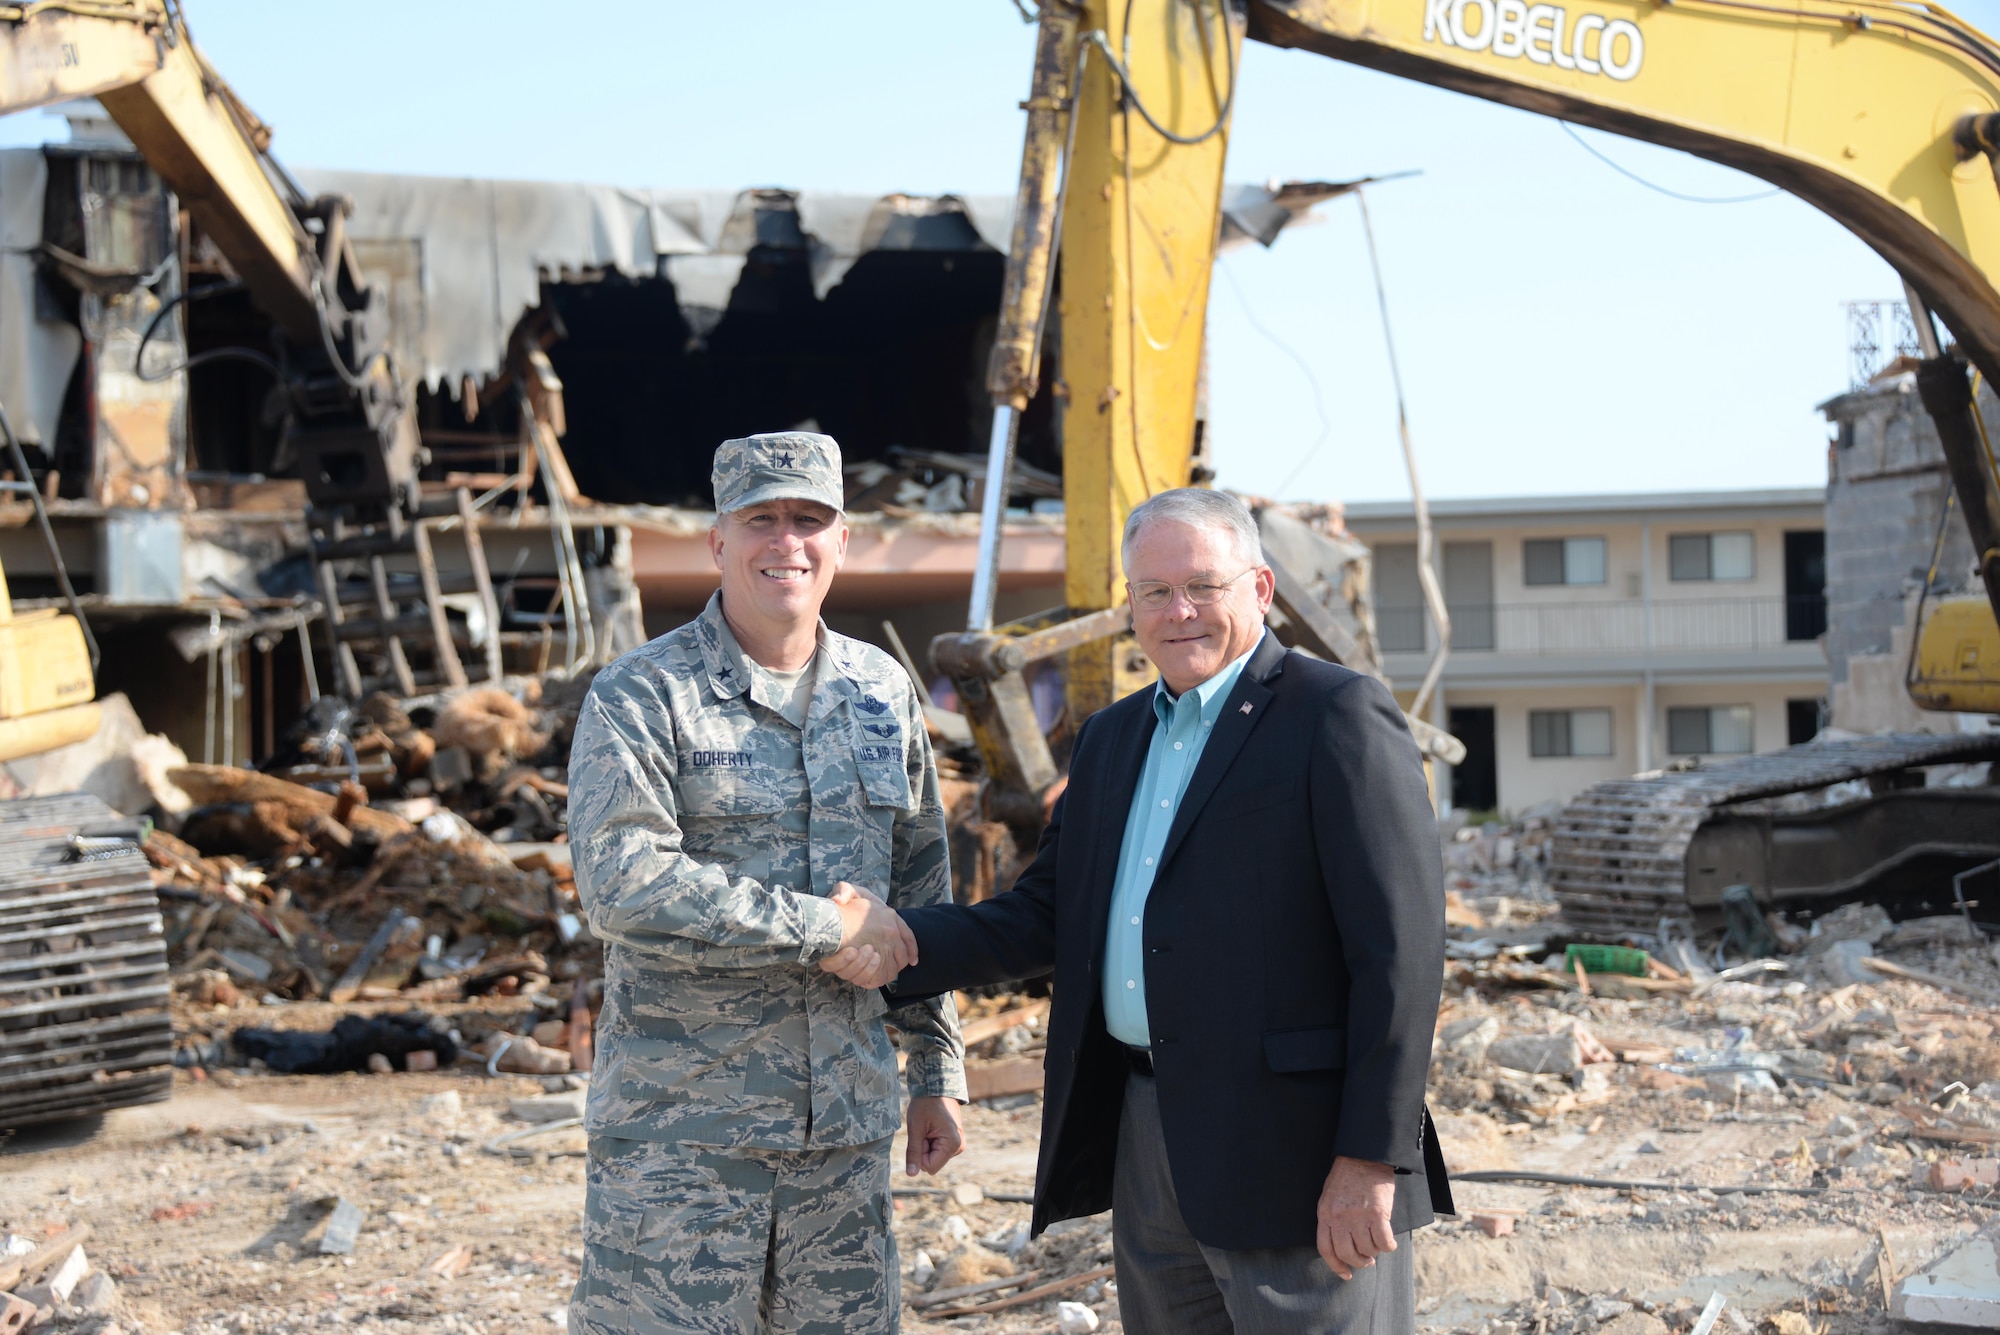 82nd Training Wing Commander Brig. Gen. Patrick Doherty shakes hands with Wichita Falls Mayor Glenn Barham outside Sheppard's Main Gate. Demolition is ongoing as part of a $3.5 million project by the city to improve the area.